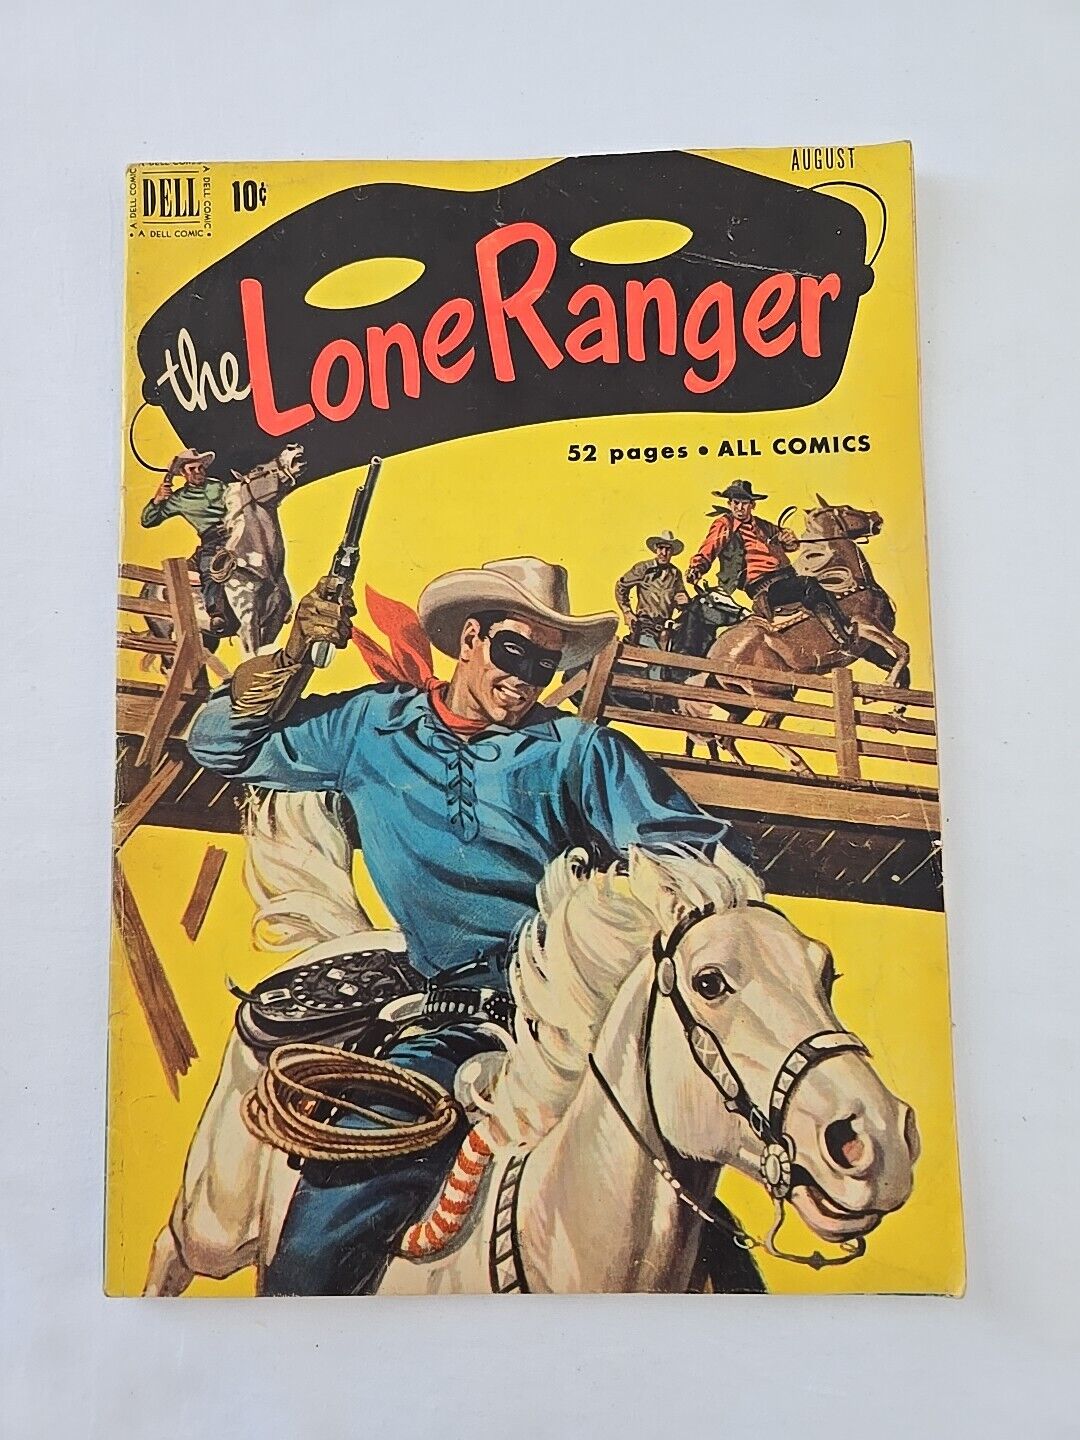 The Lone Ranger #38 (Aug 1951)  52-page Dell comic book painted cover